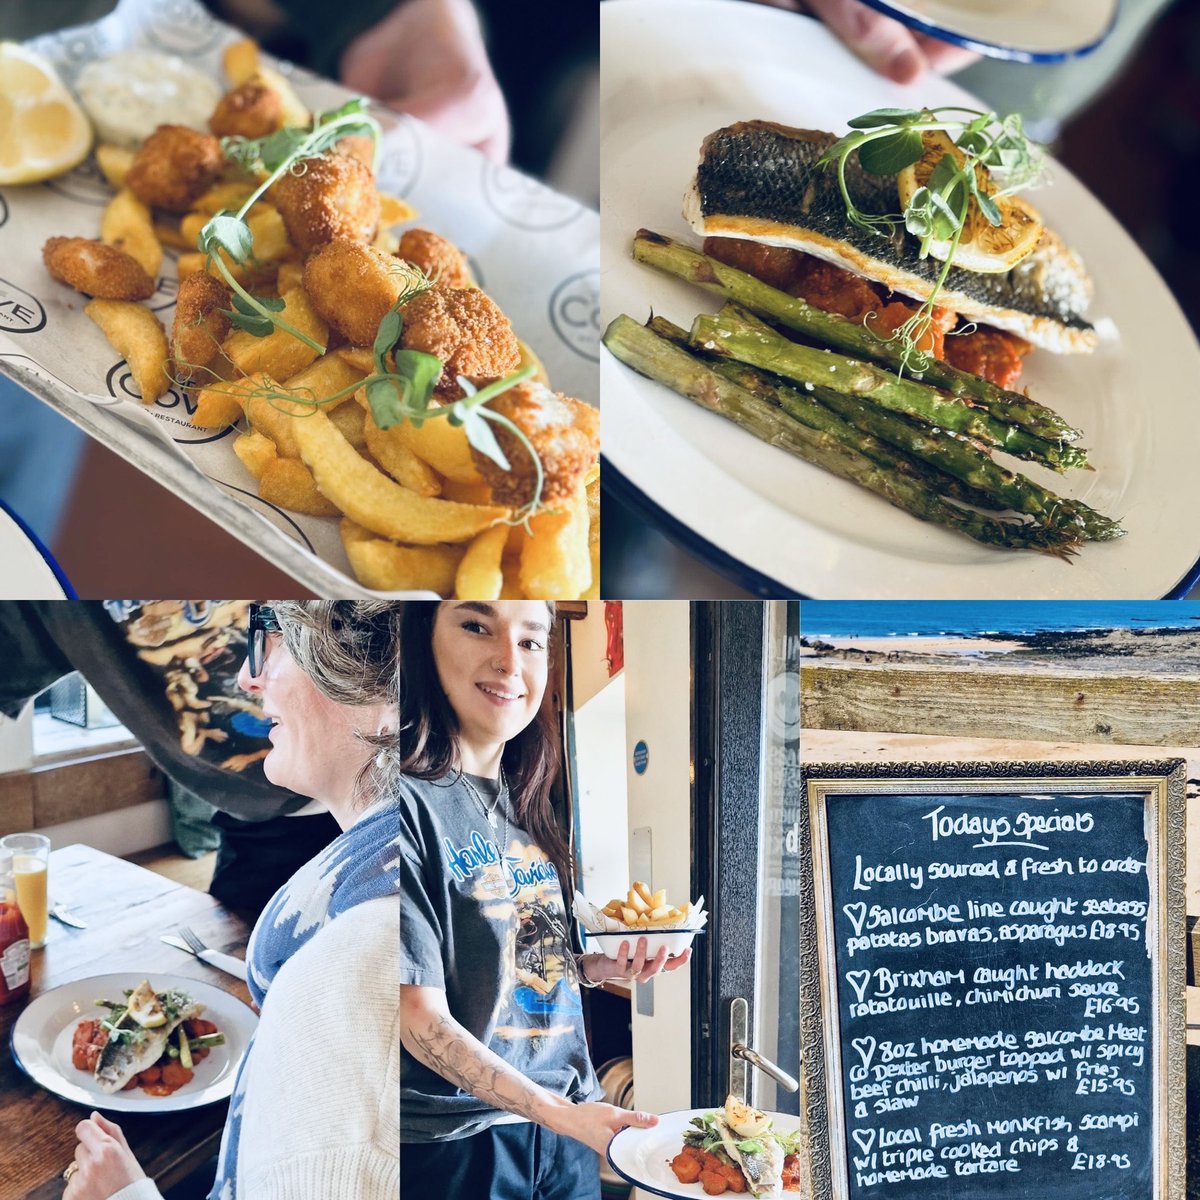 ☀️Sunshine Specials Today!☀️ Our Daily Special of Salcombe line caught seabass with patatas bravas and fresh asparagus is going down well on this beautiful sunny day in Hope Cove... 🐟🪝🏝 🌟Devon Crab Linguine, with chilli, garlic and white wine cream! 🦀 🥂 (Monkfish sold out).